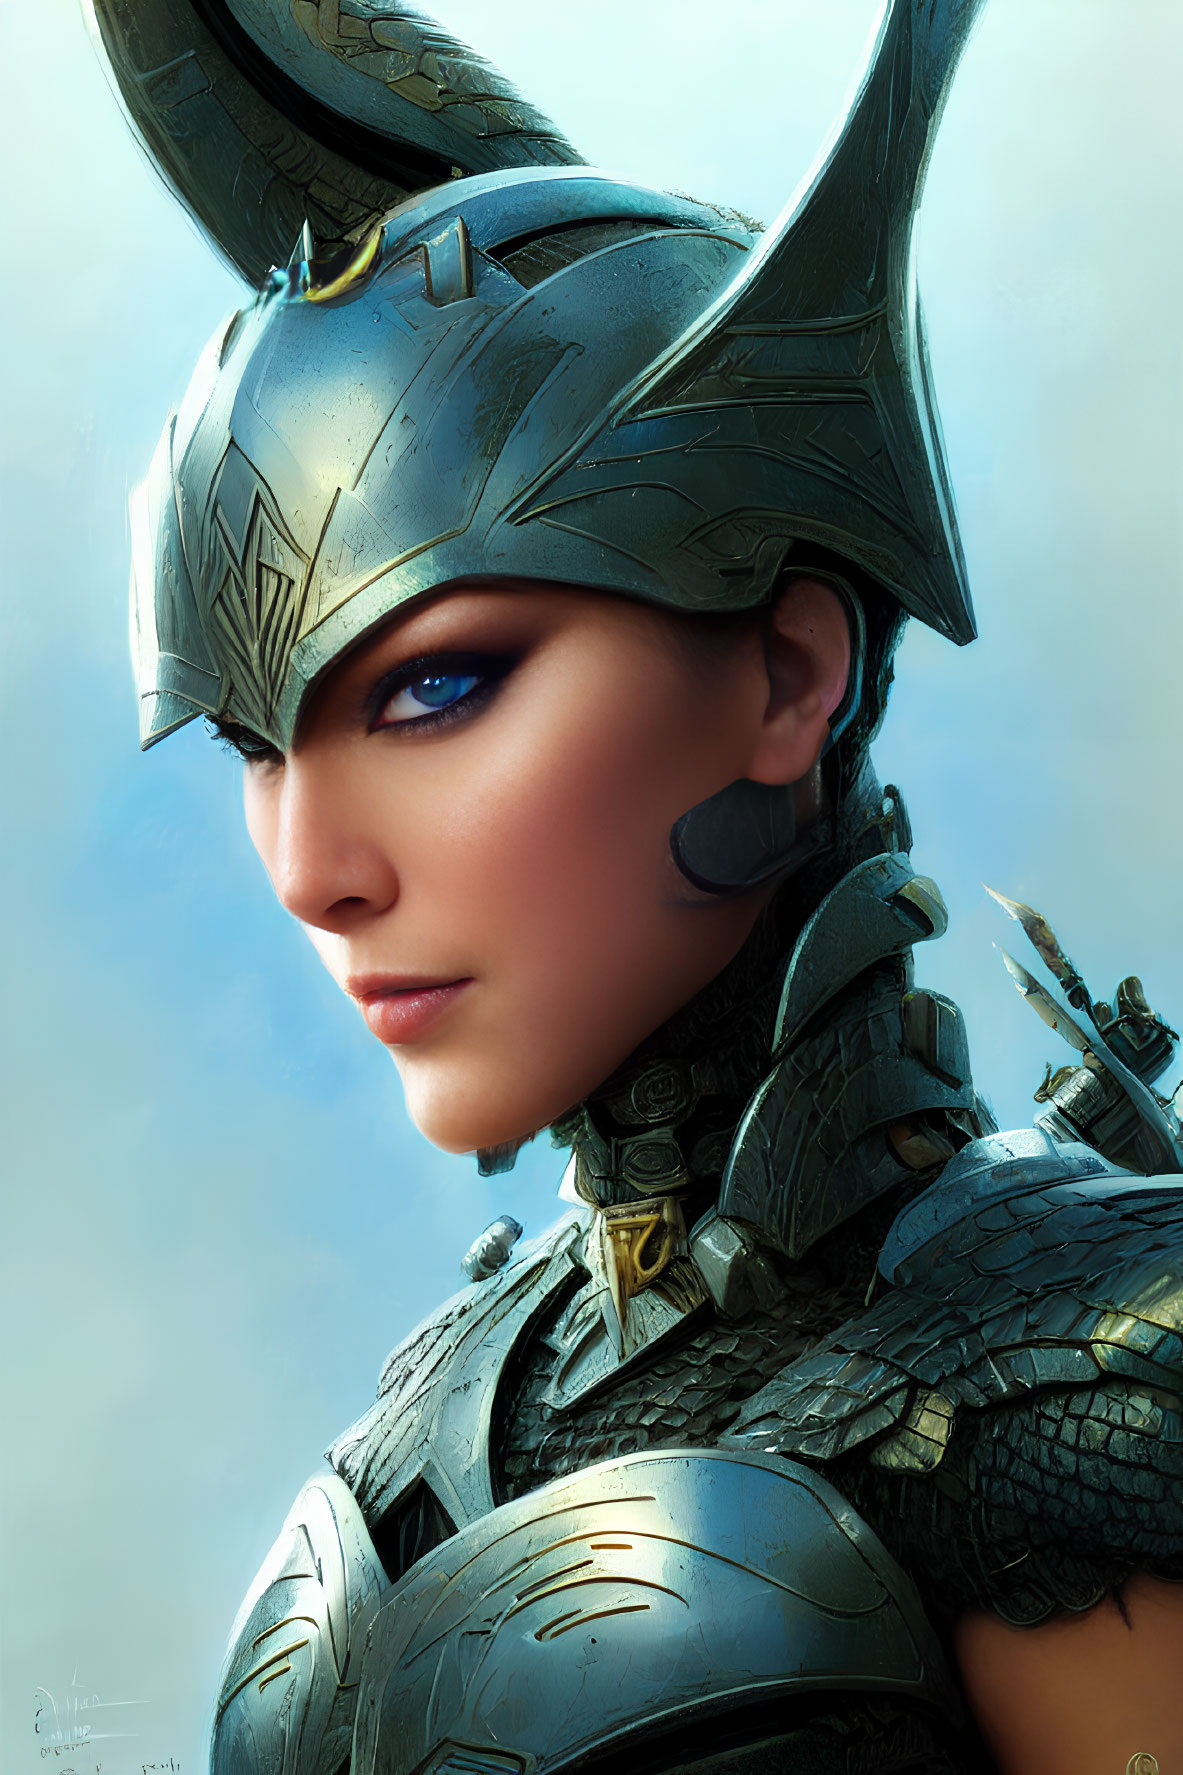 Detailed portrait of a woman in ornate Norse Valkyrie helmet and metallic armor with intense blue eyes